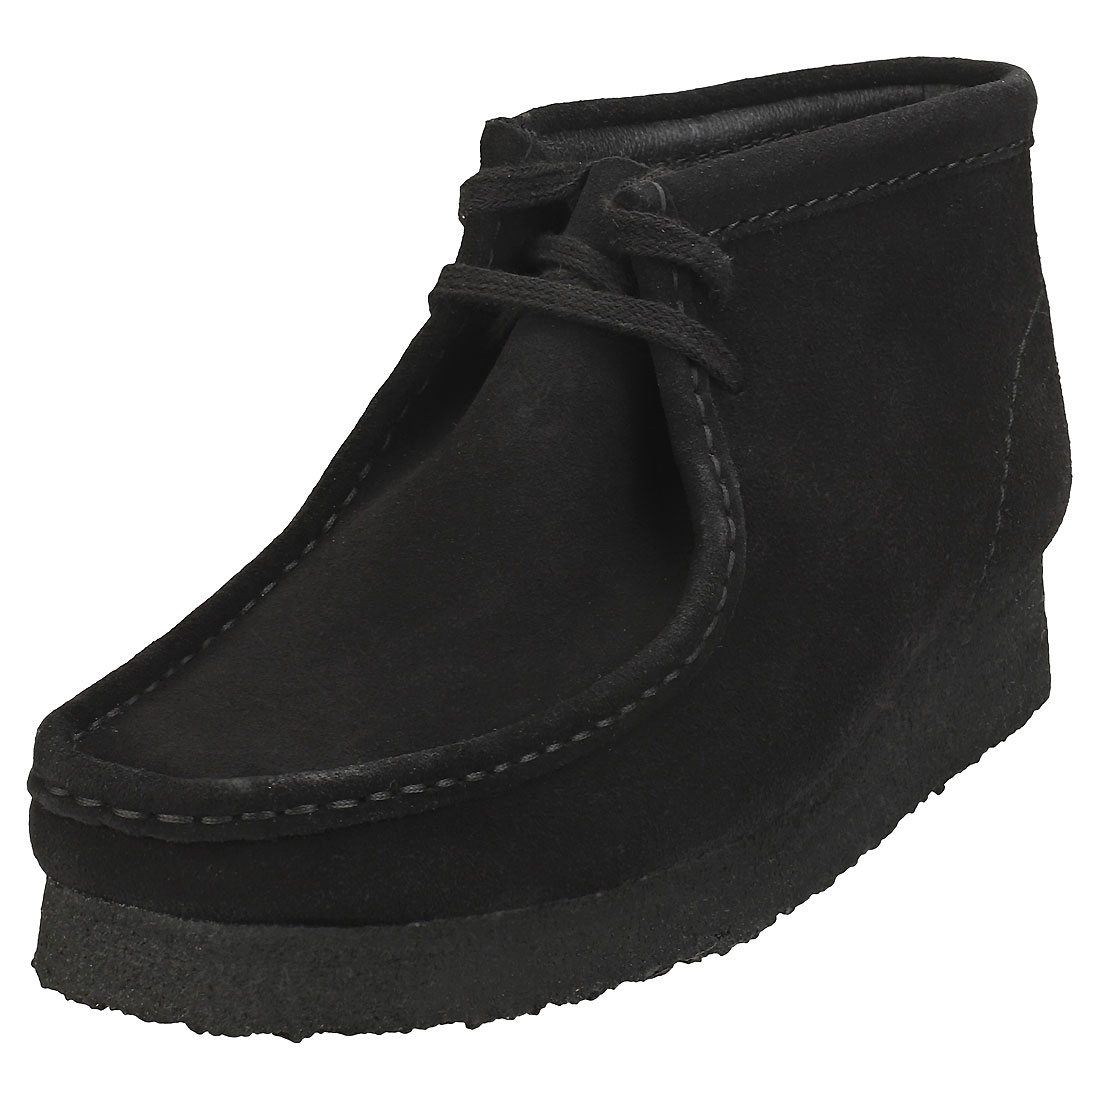 clarks wallabee black suede womens shoes